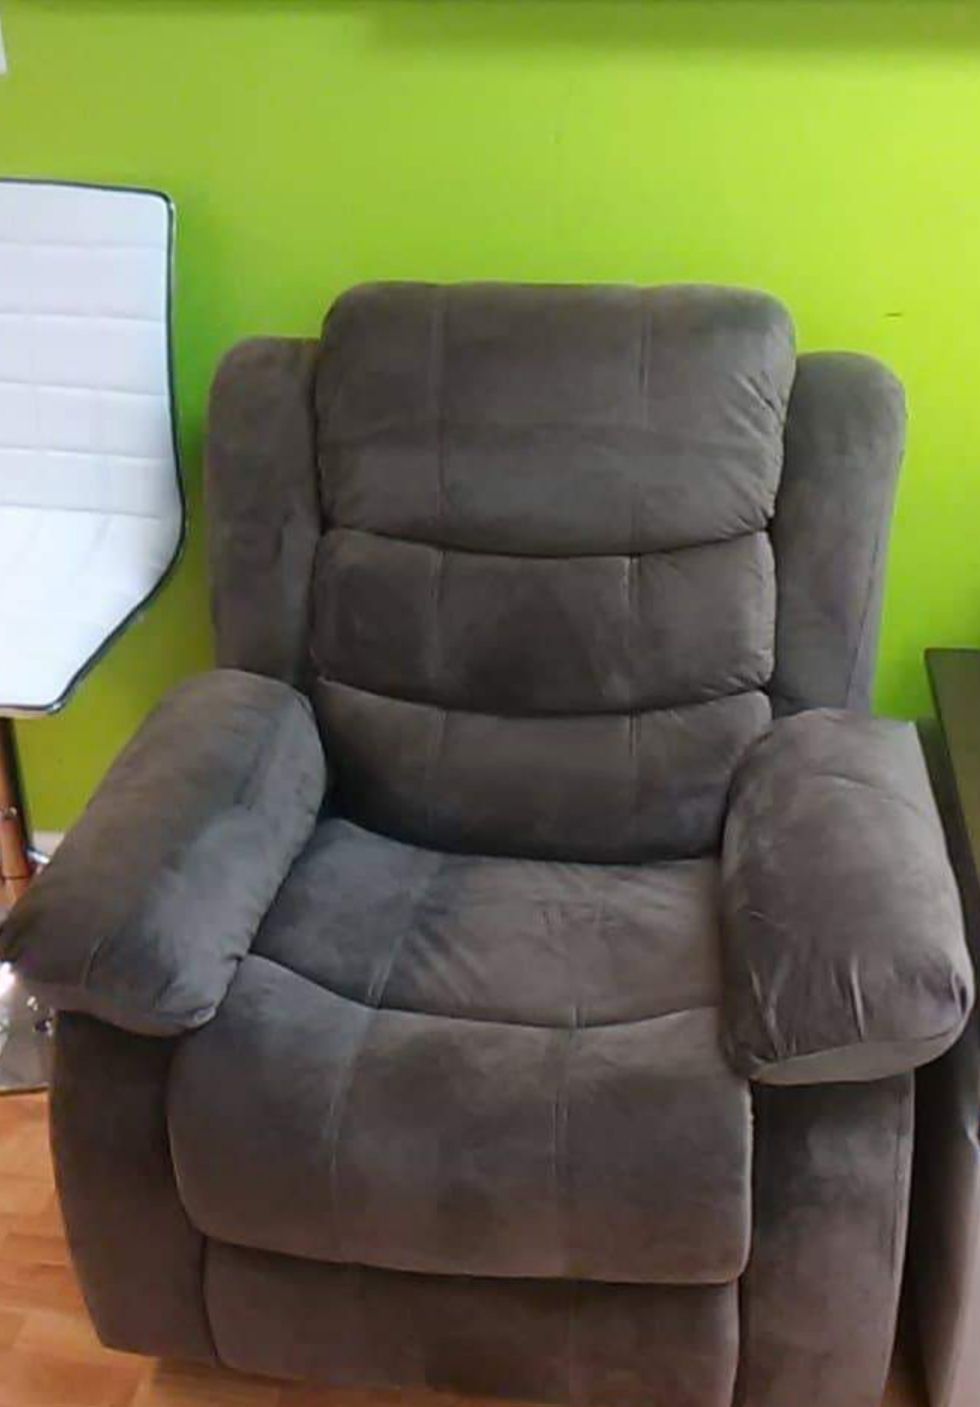 Small chair recliner